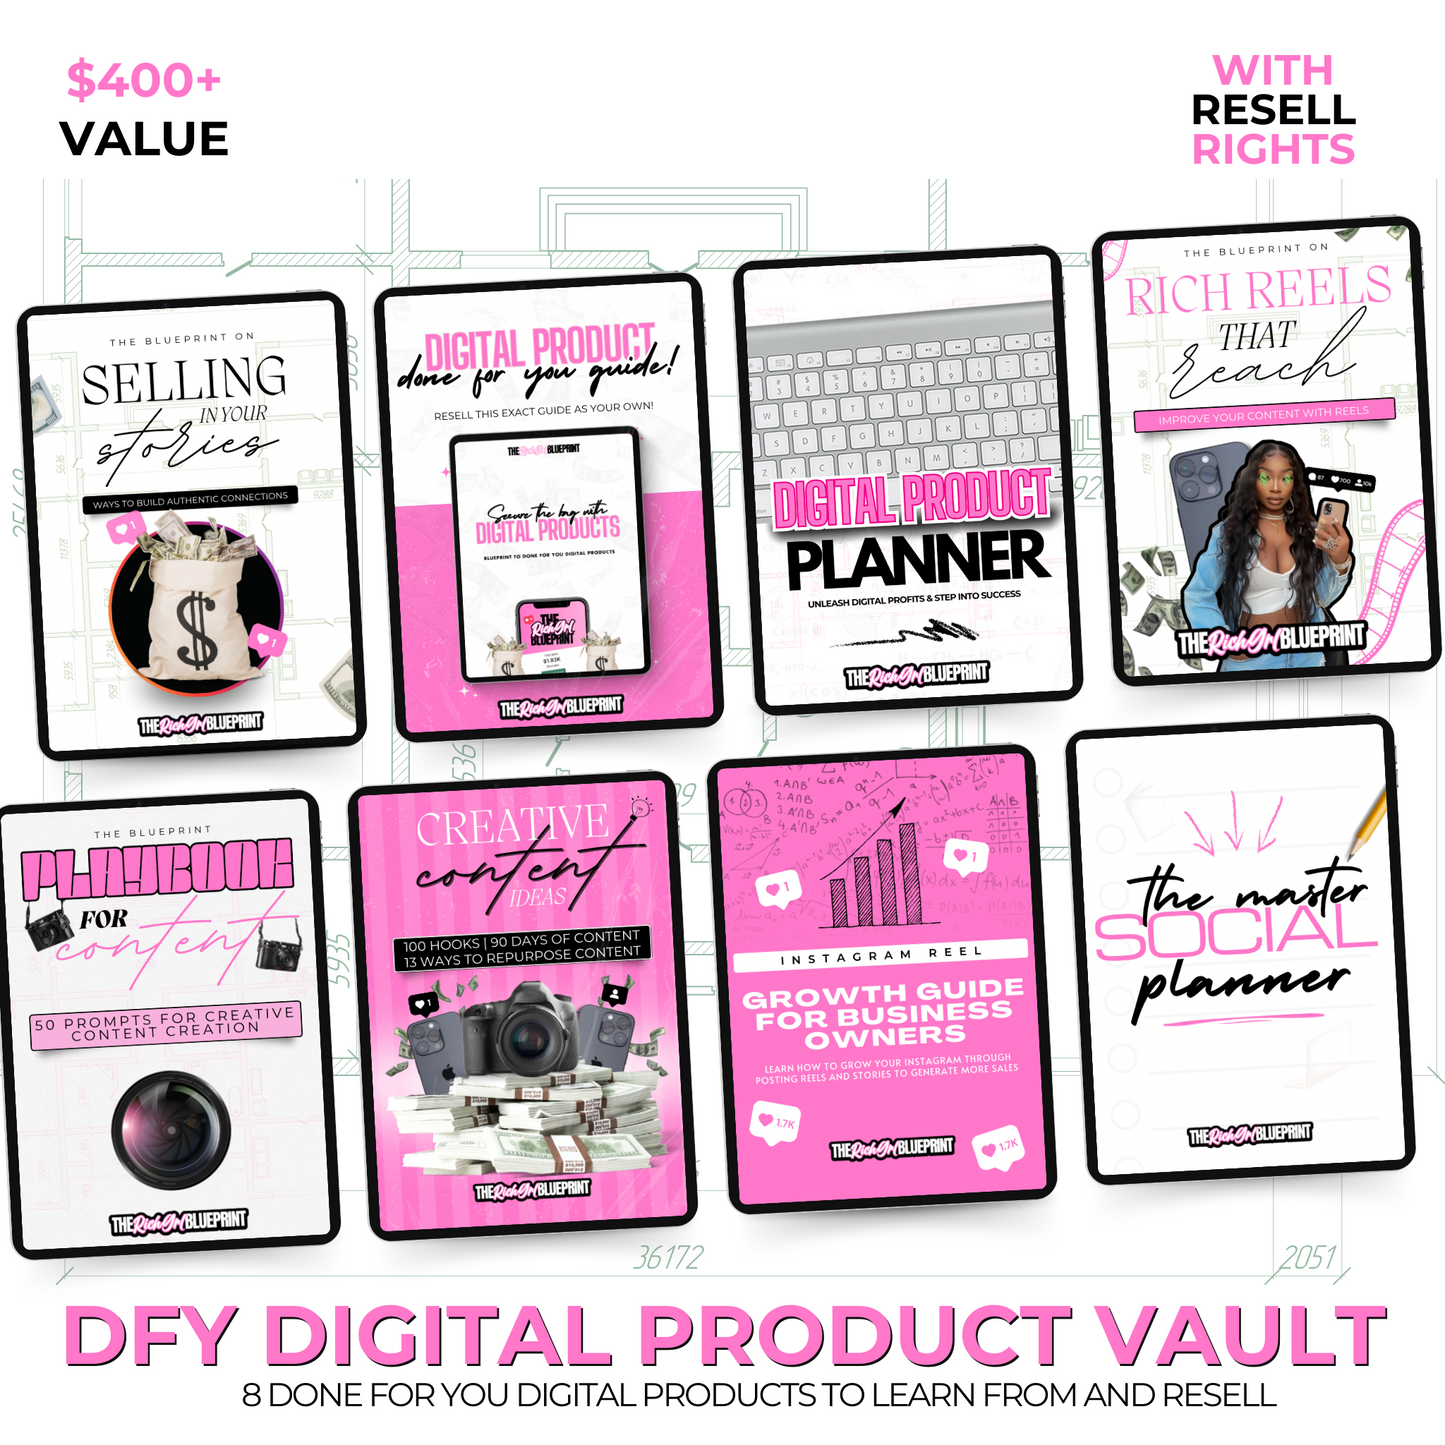 DFY Digital Product Vault [With Resell Rights]